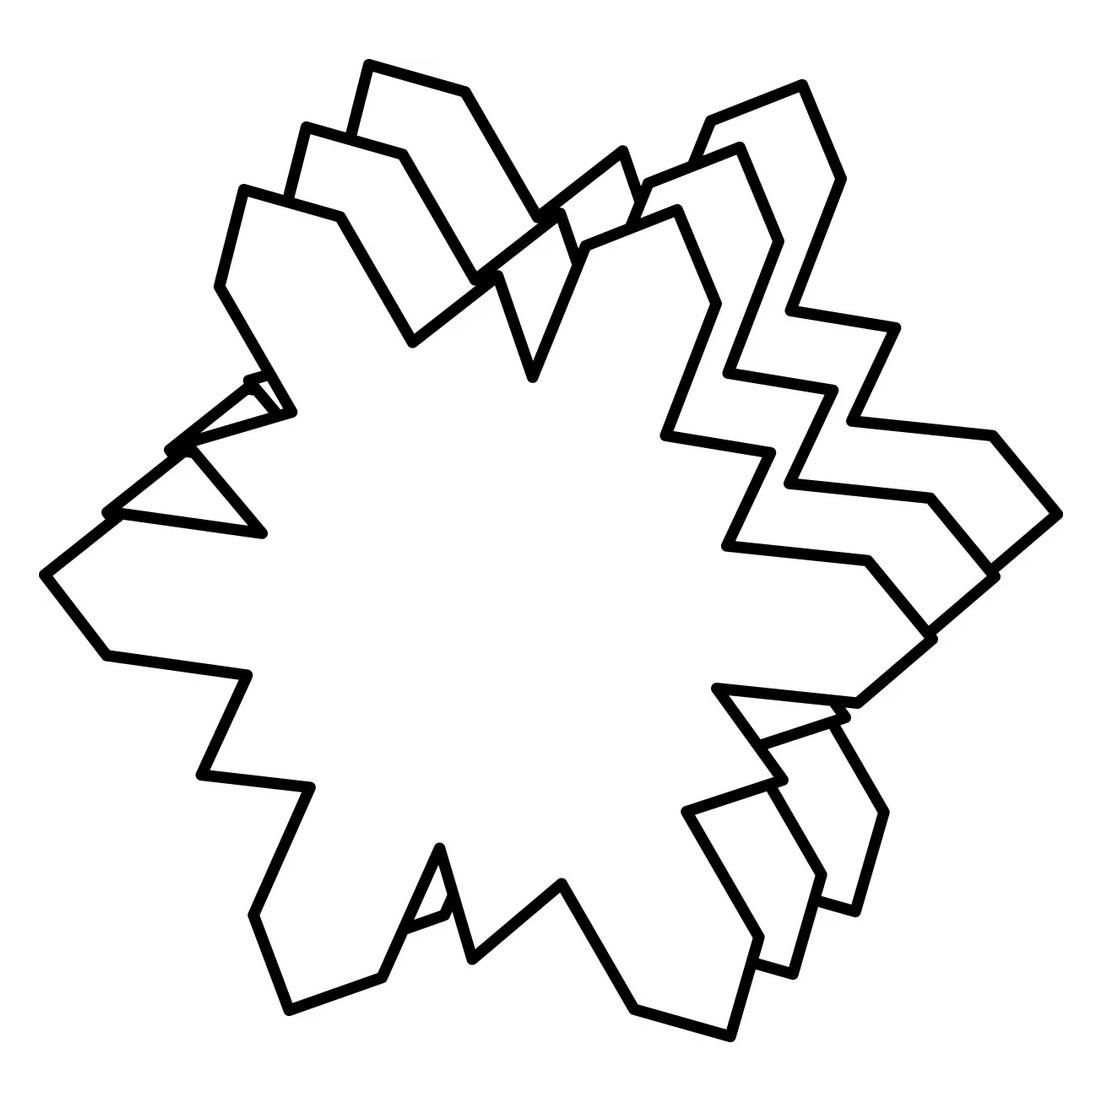 Snowflake Cut-Outs by Creative Shapes